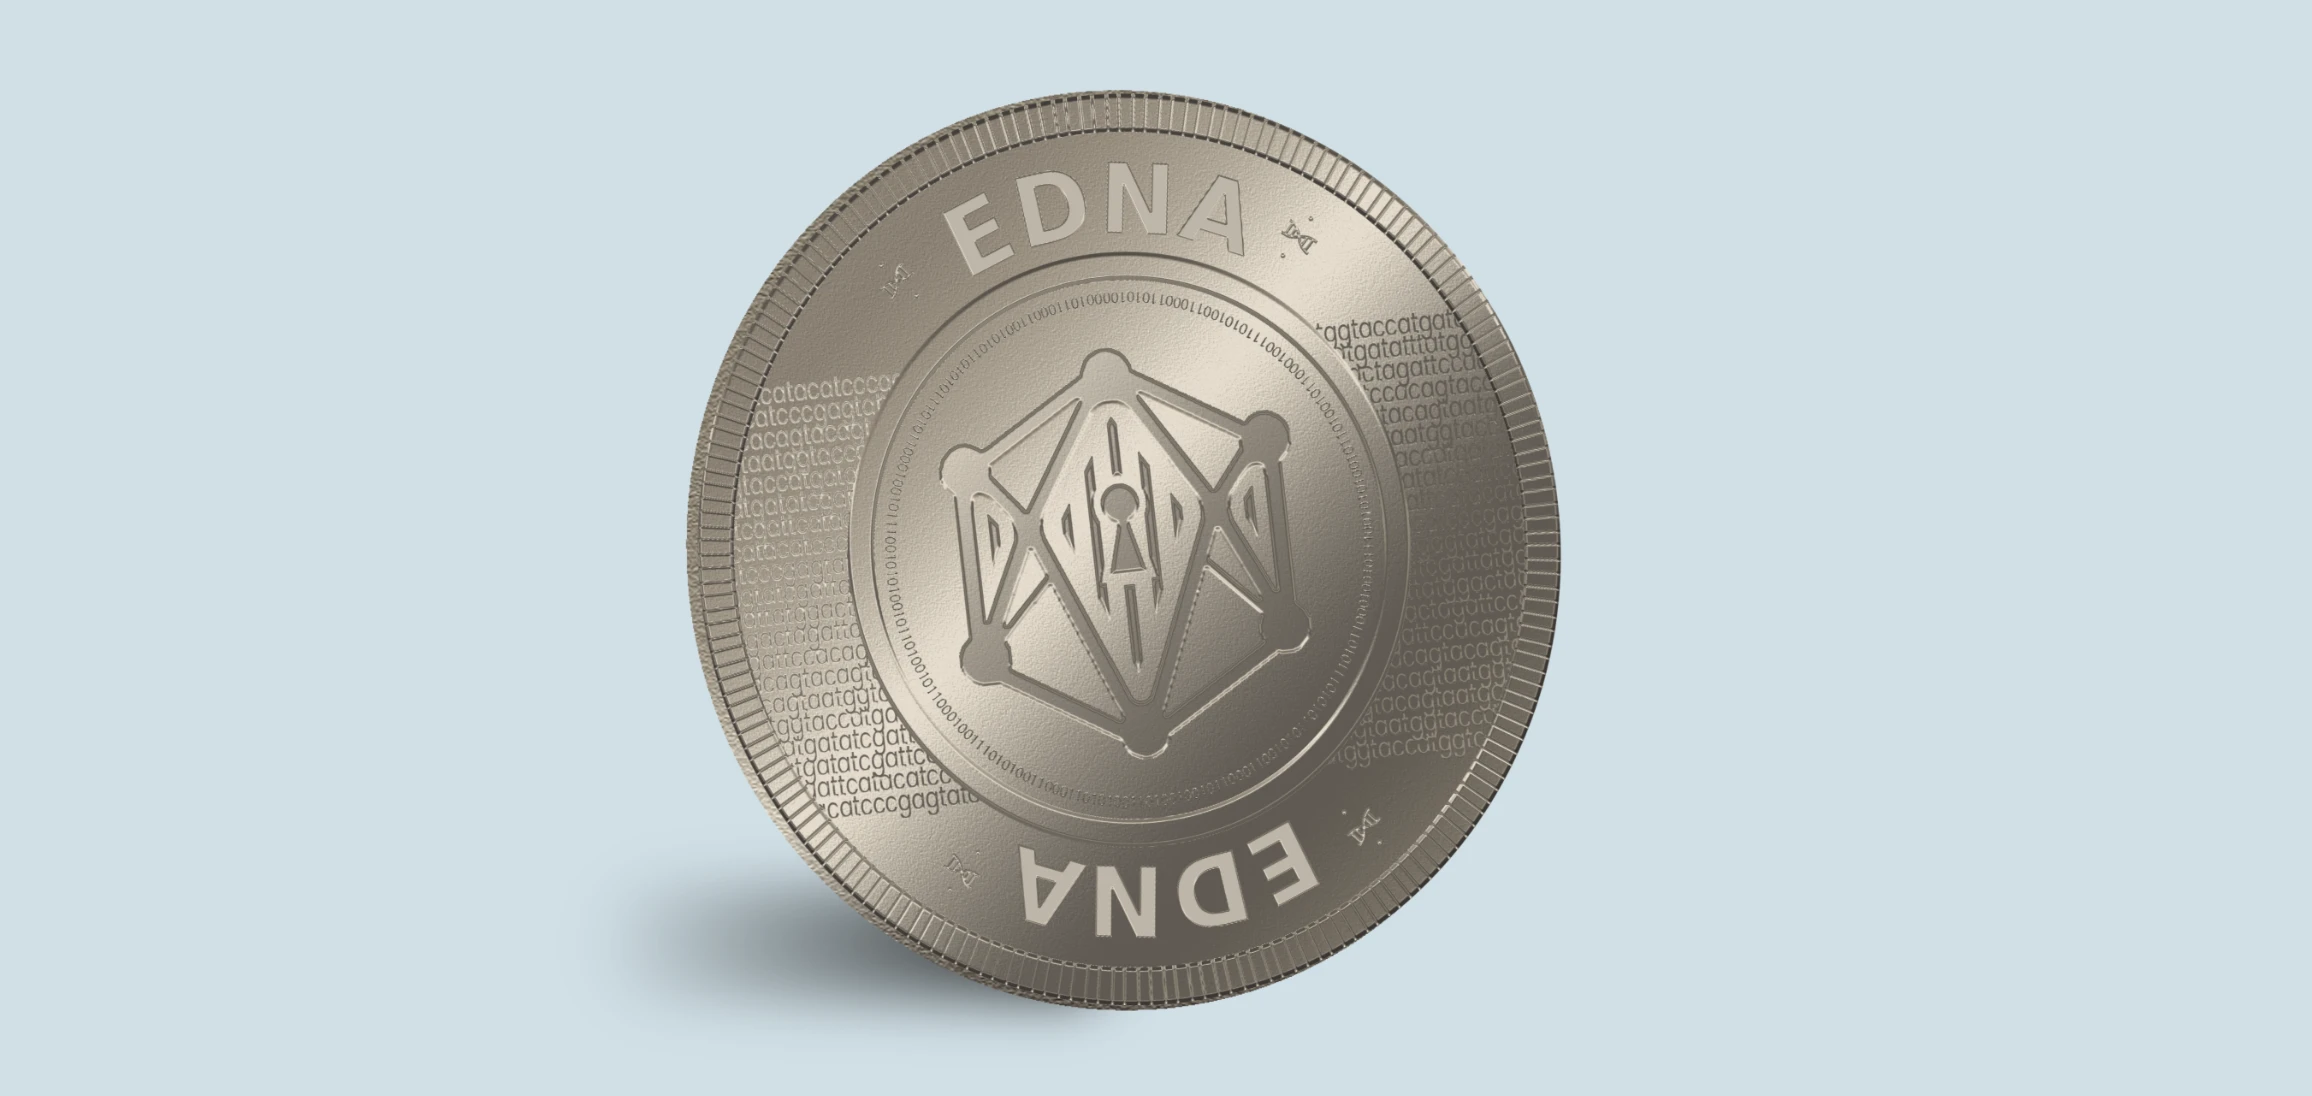 Whole genome sequencing EDNA Token cryptocurrency